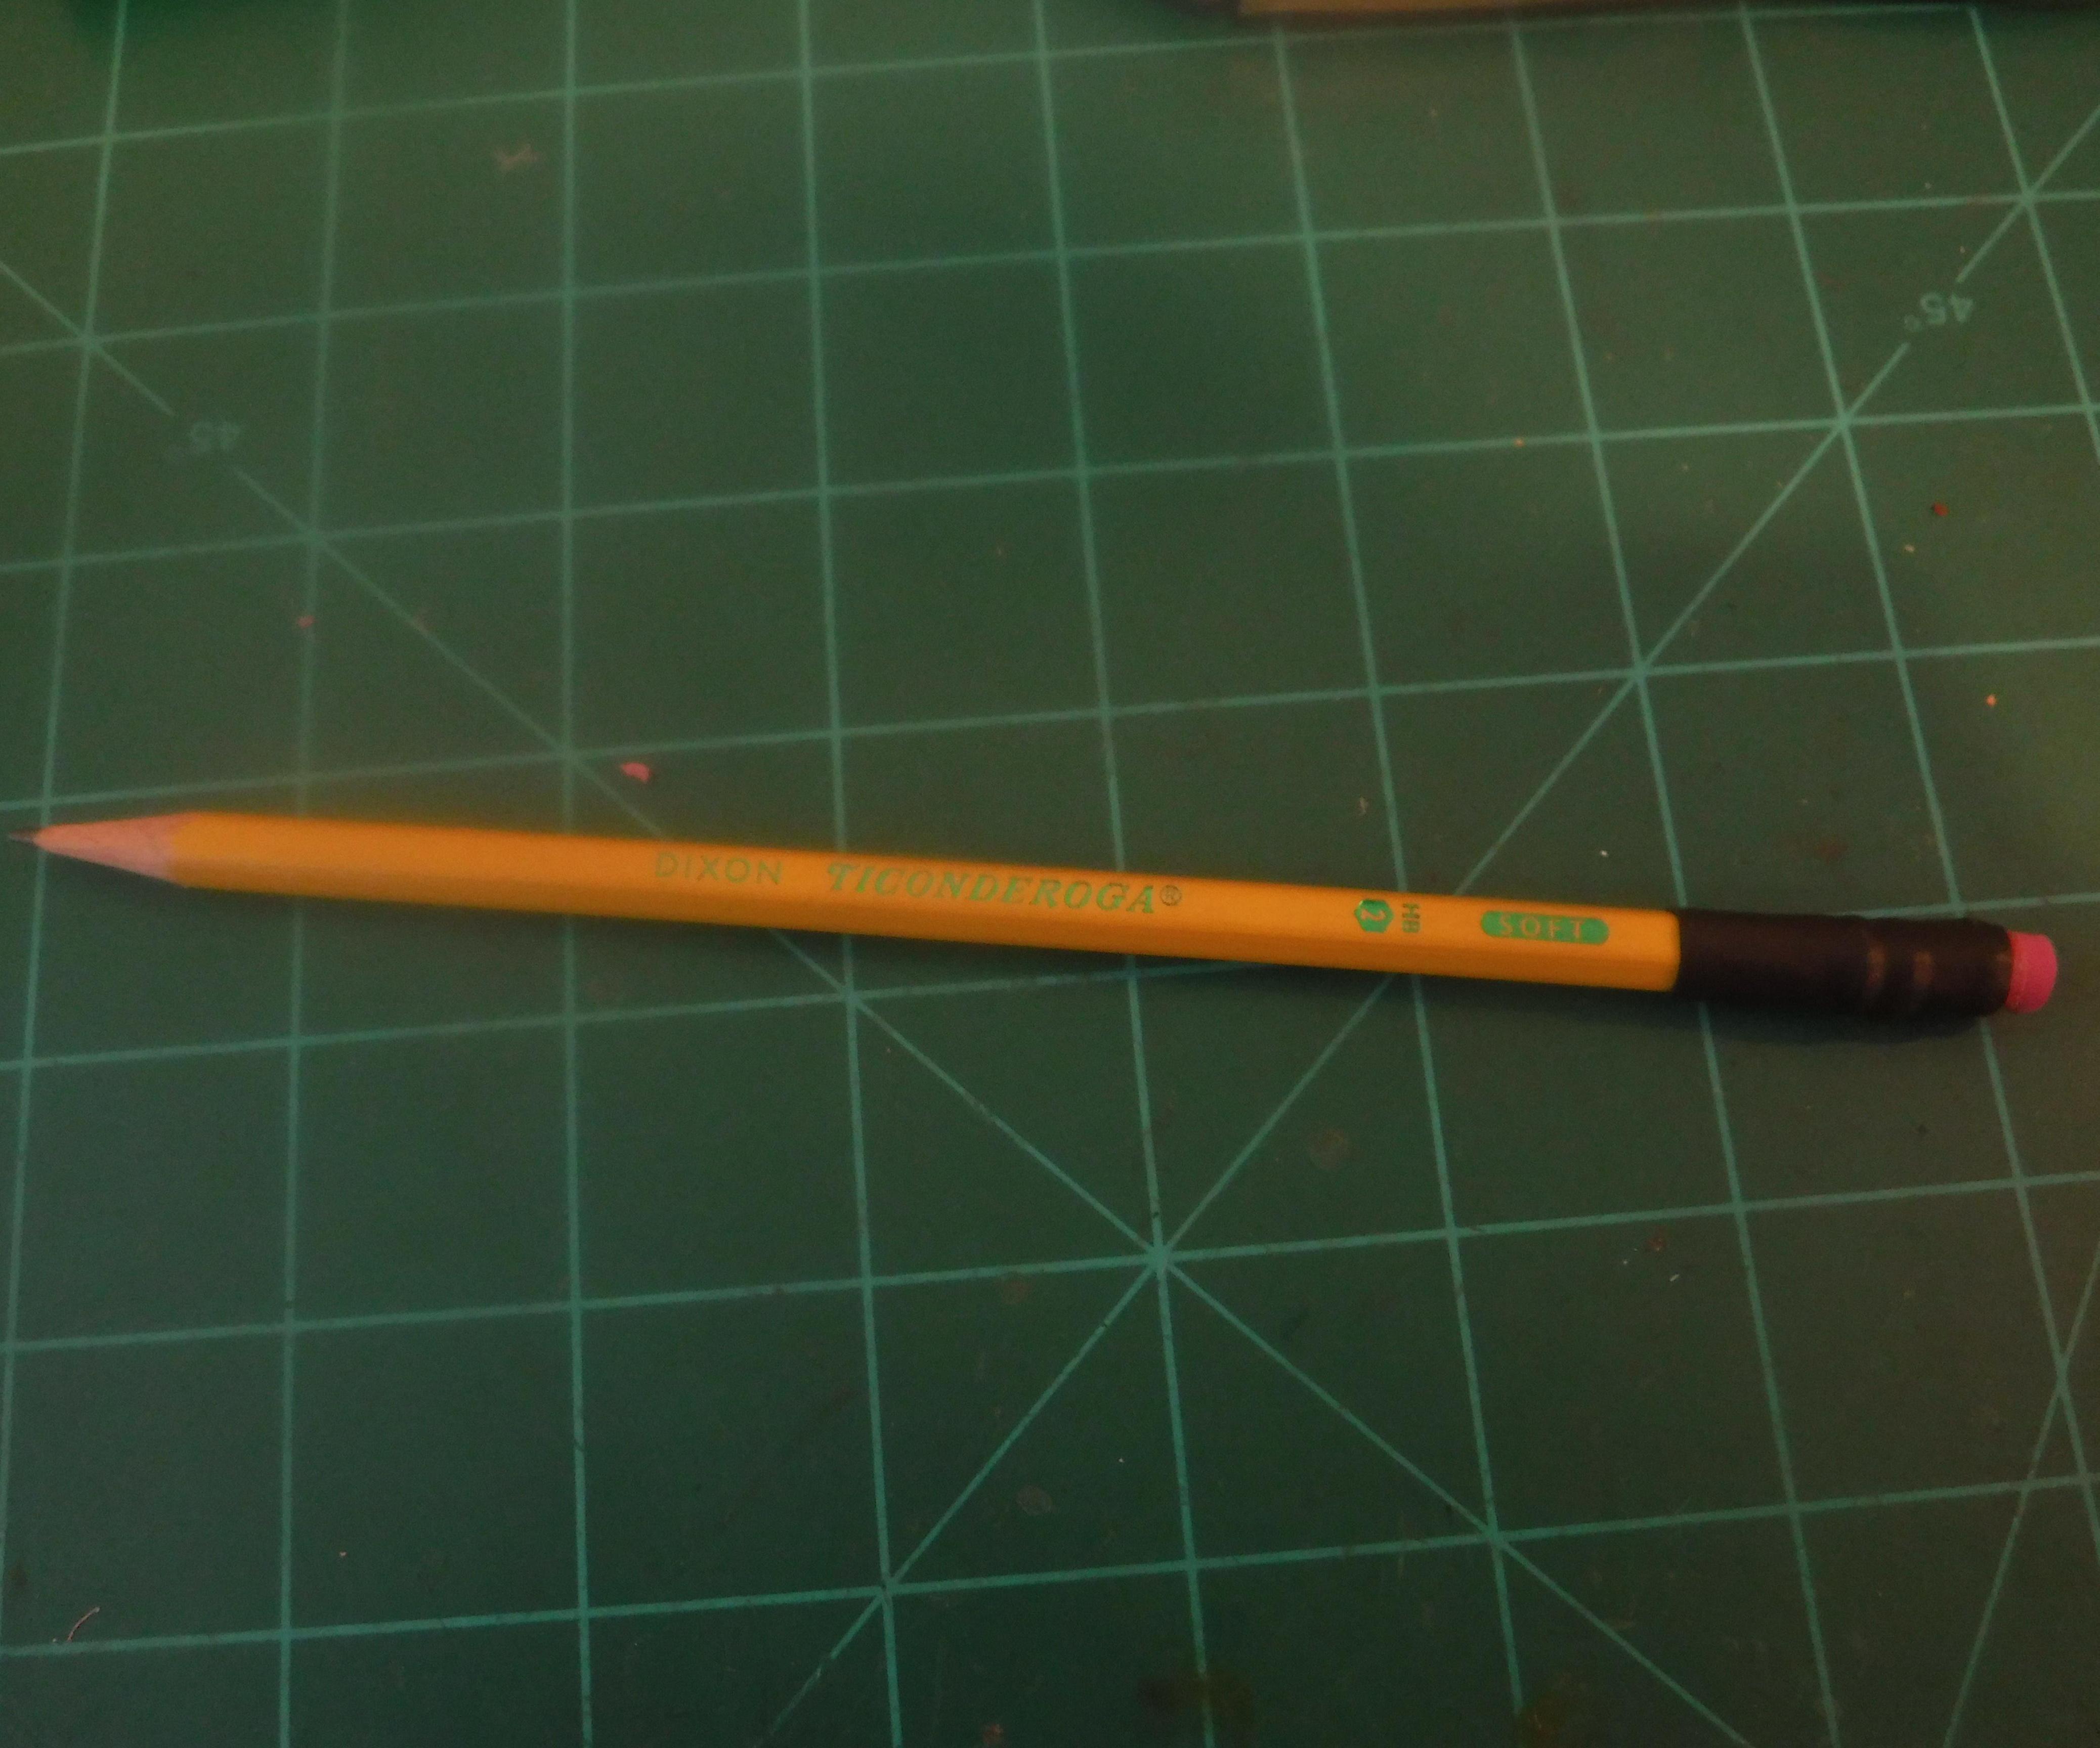 How to Reuse a Worn Down Pencil Eraser.